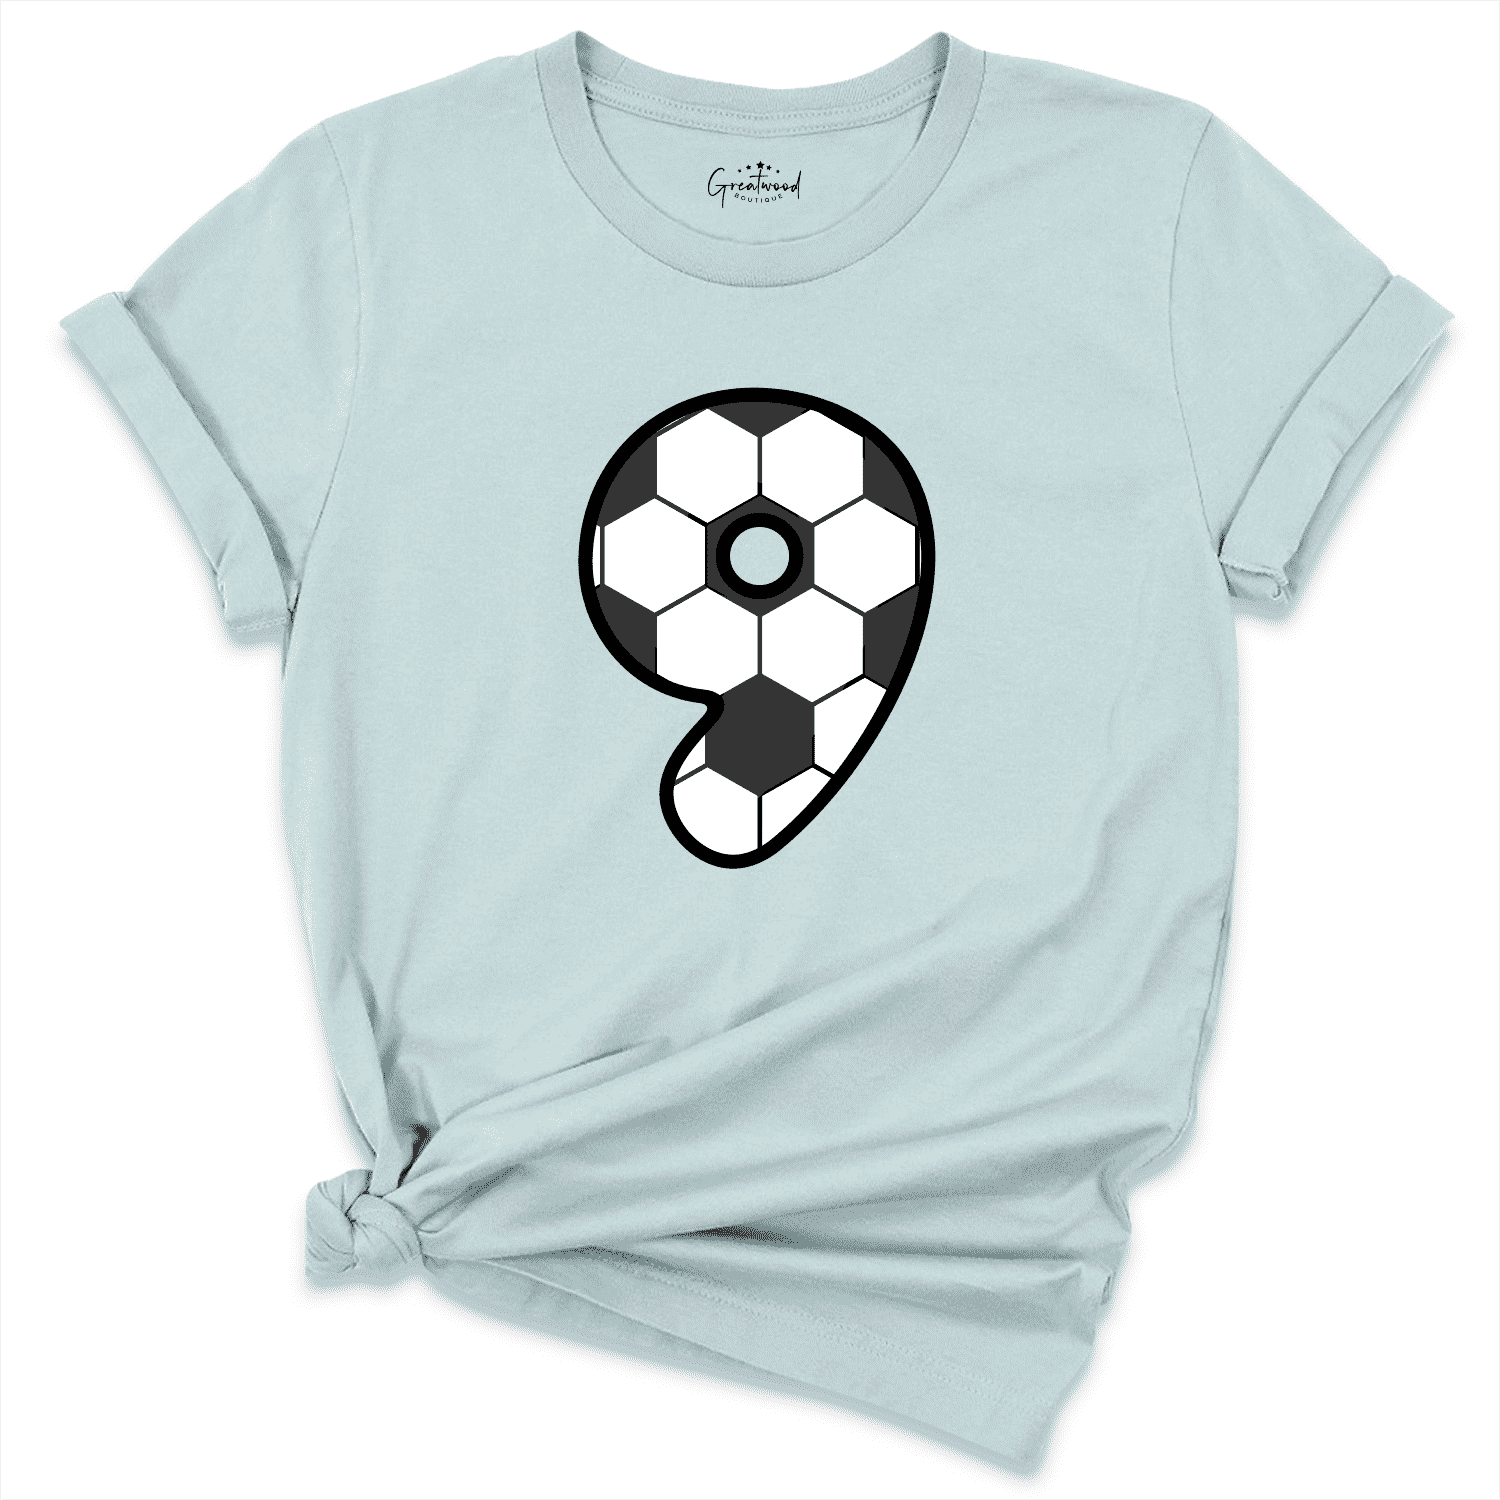 Soccer Shirt Blue - Greatwood Boutique